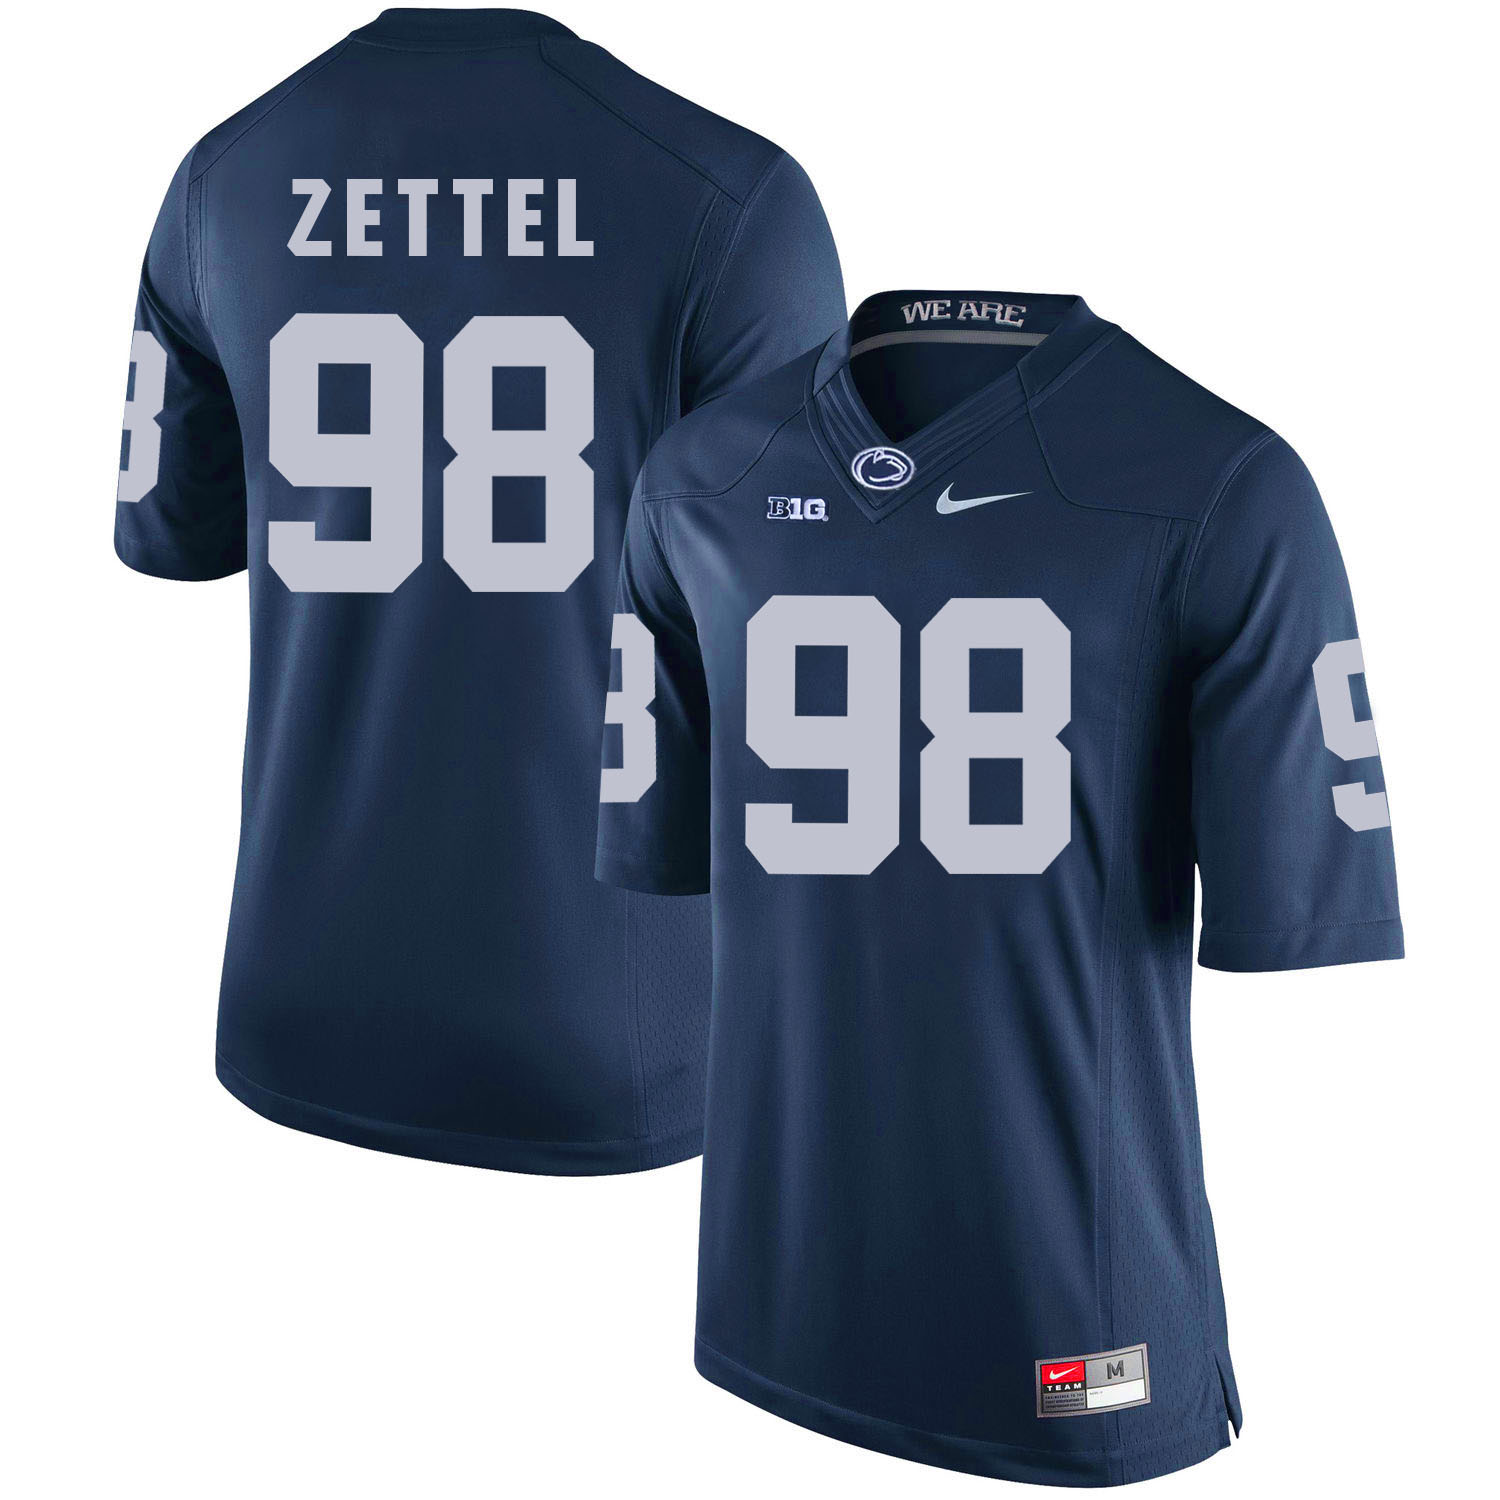 Penn State Nittany Lions 98 Anthony Zettel Navy College Football Jersey